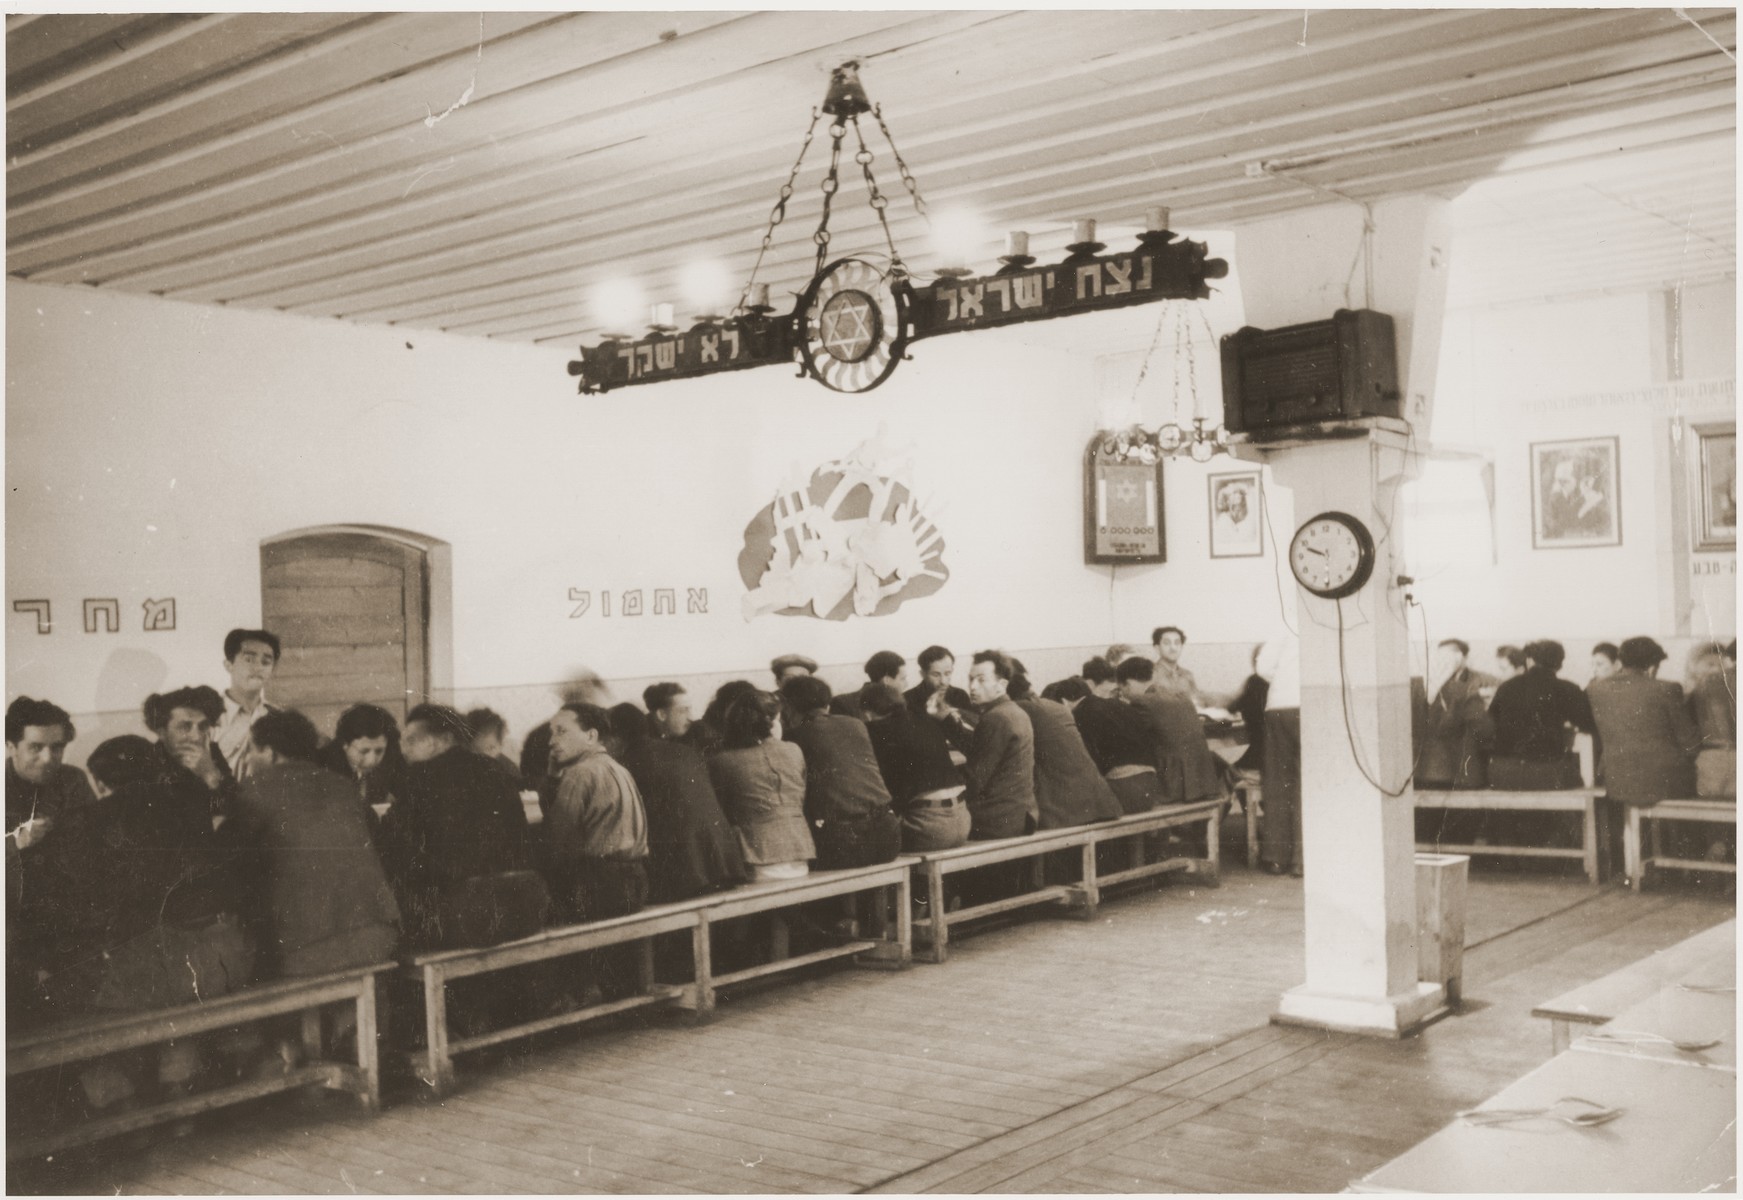 Members of the Kibbutz Nili hachshara (Zionist collective) in Pleikershof, Germany sit around tables in the dining hall.  

The room is decorated with portraits of Zionist leaders, the words "Yesterday" and "Tomorrow" and the motto of the kibbutz.